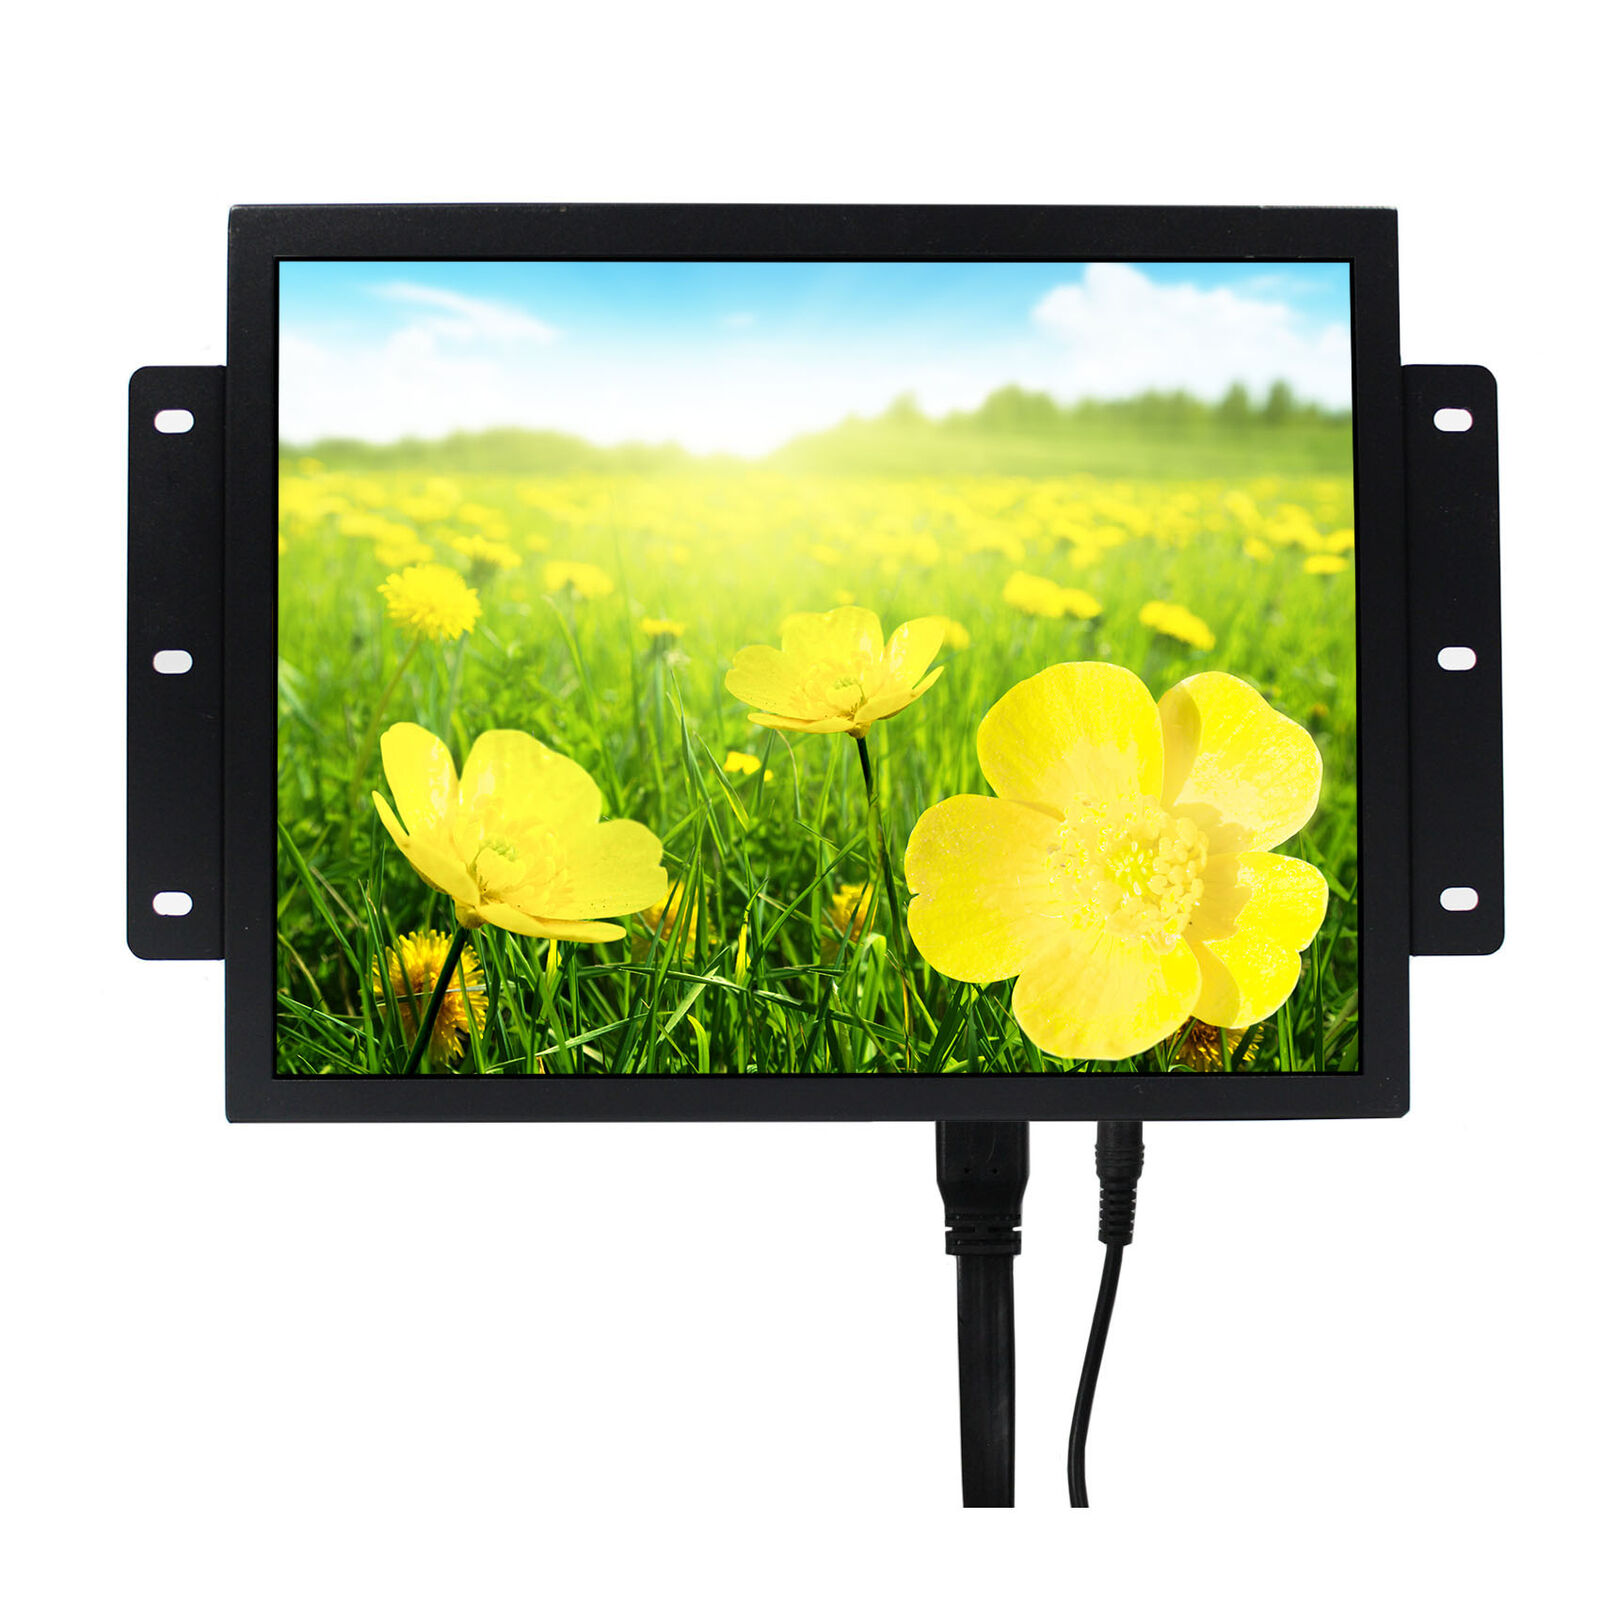 12.1 in 800x600 LED Backlight Resistive Touch LCD Monitor Industiral Monitor